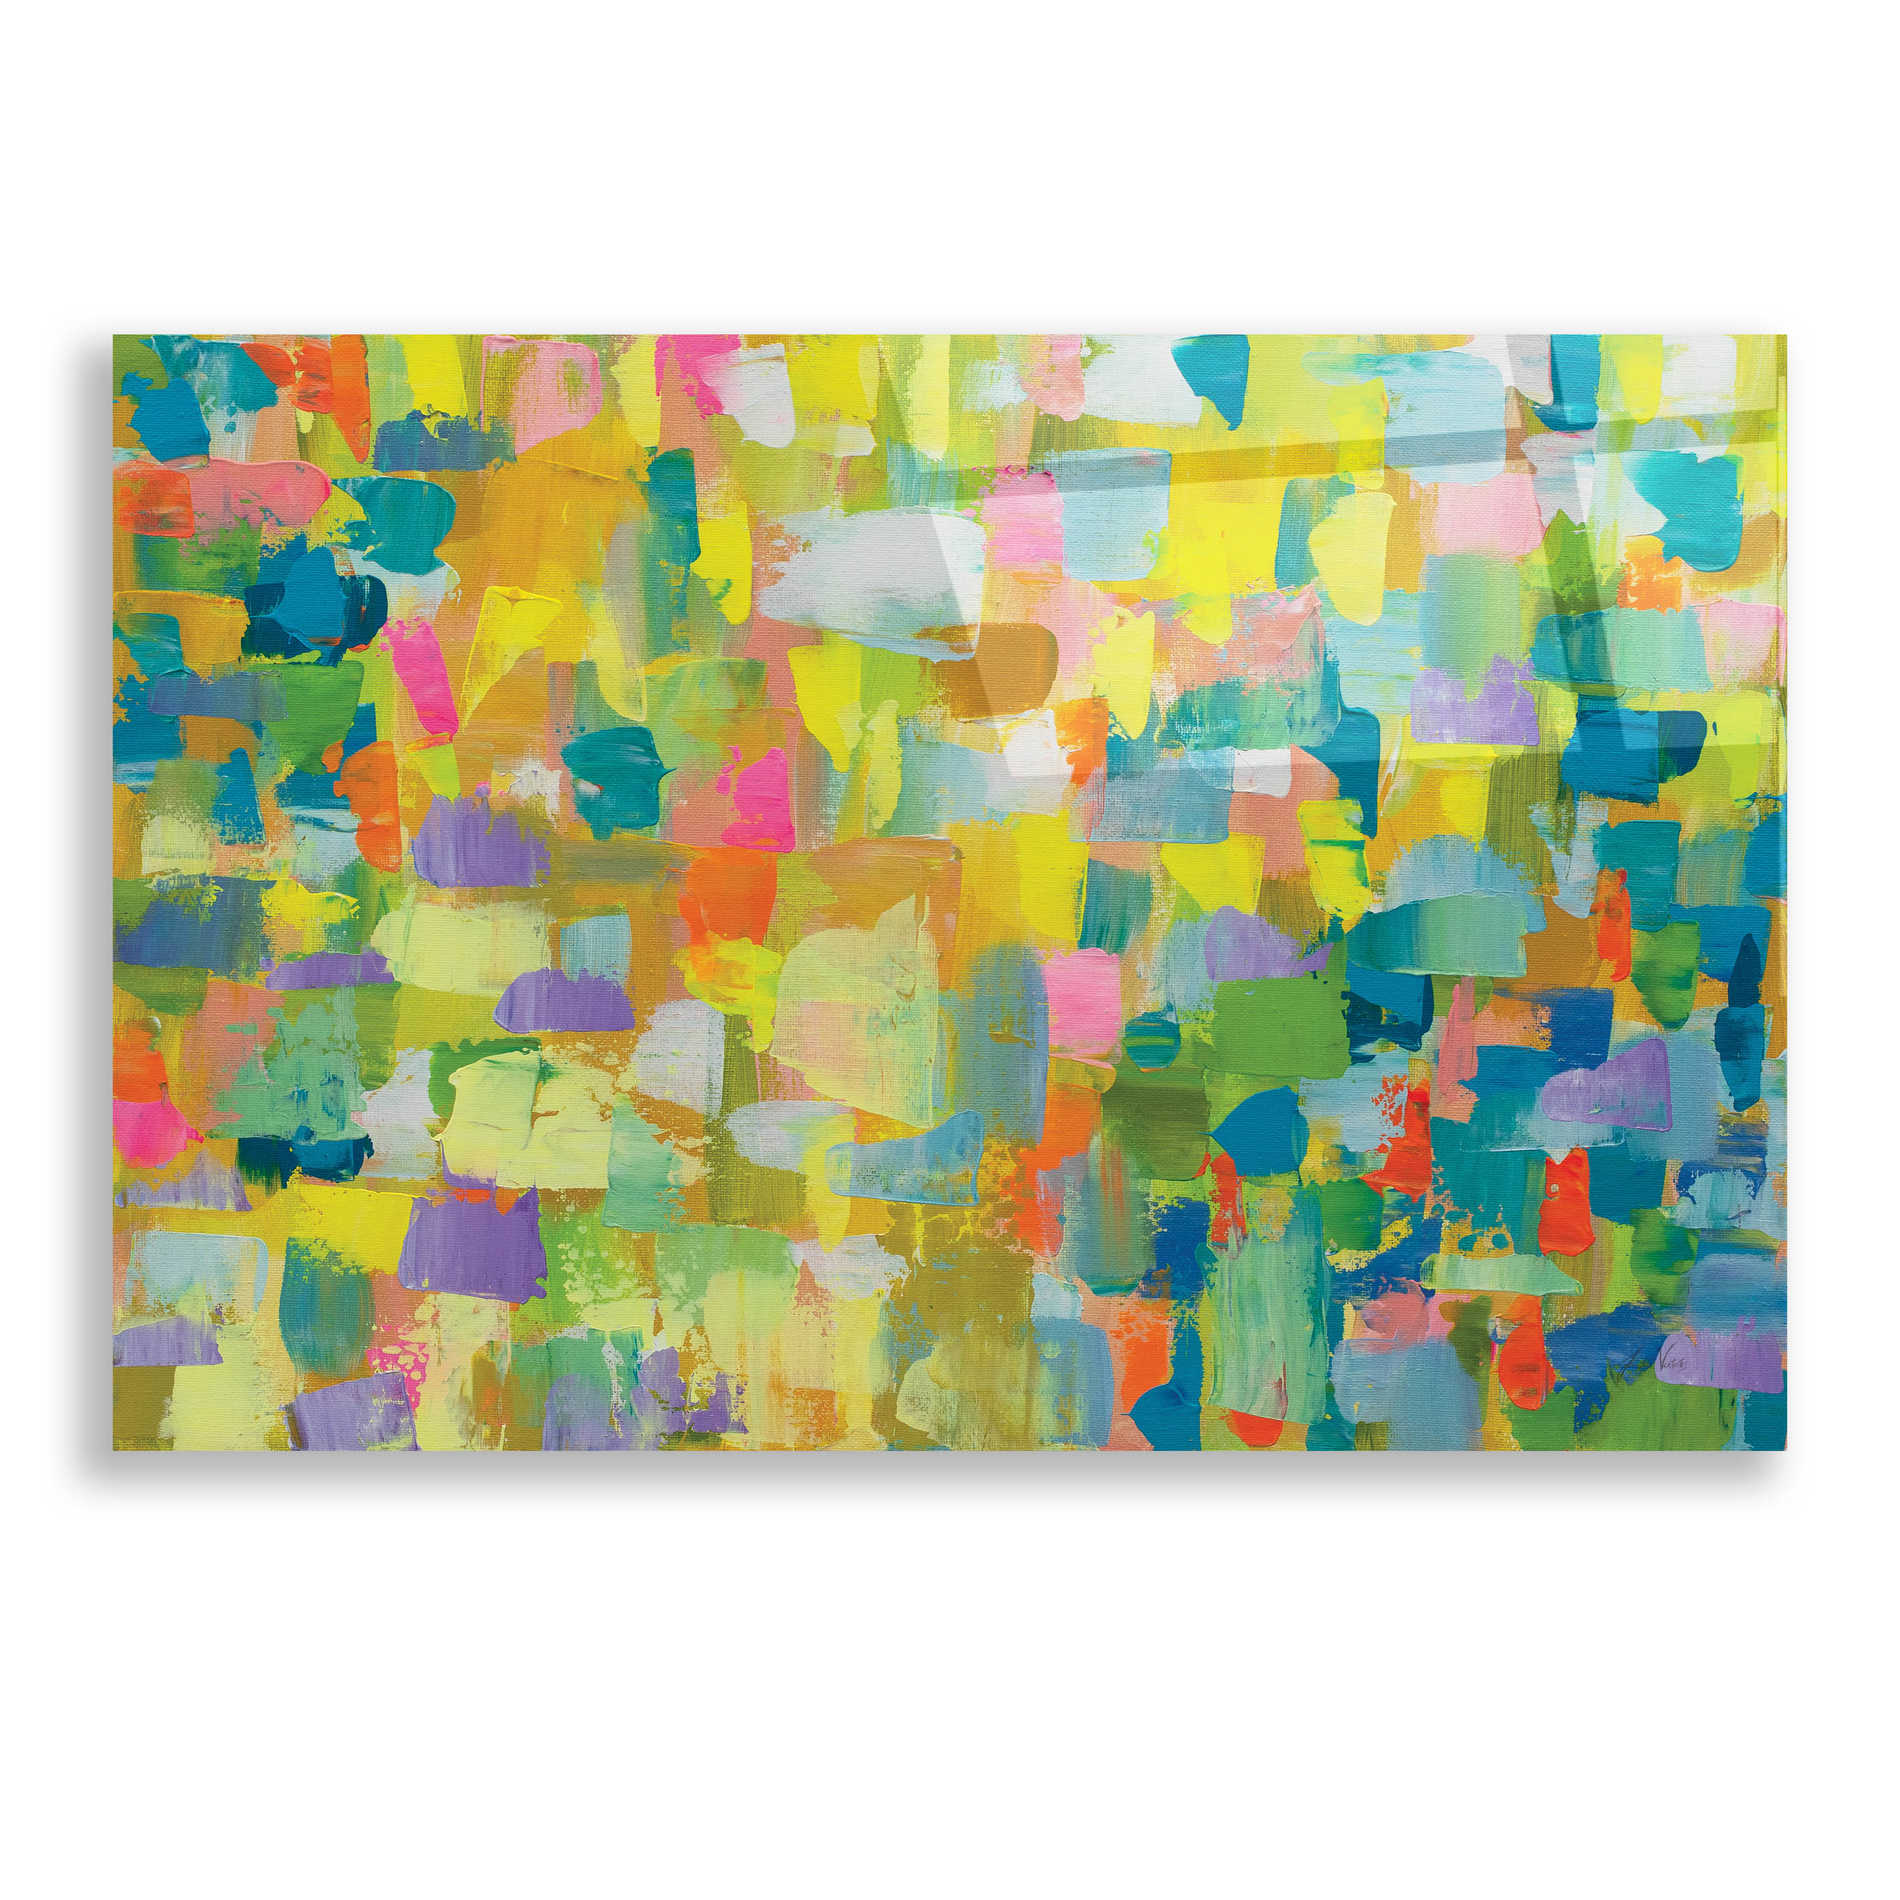 Epic Art 'Merrymaking' by Jeanette Vertentes, Acrylic Glass Wall Art,24x16